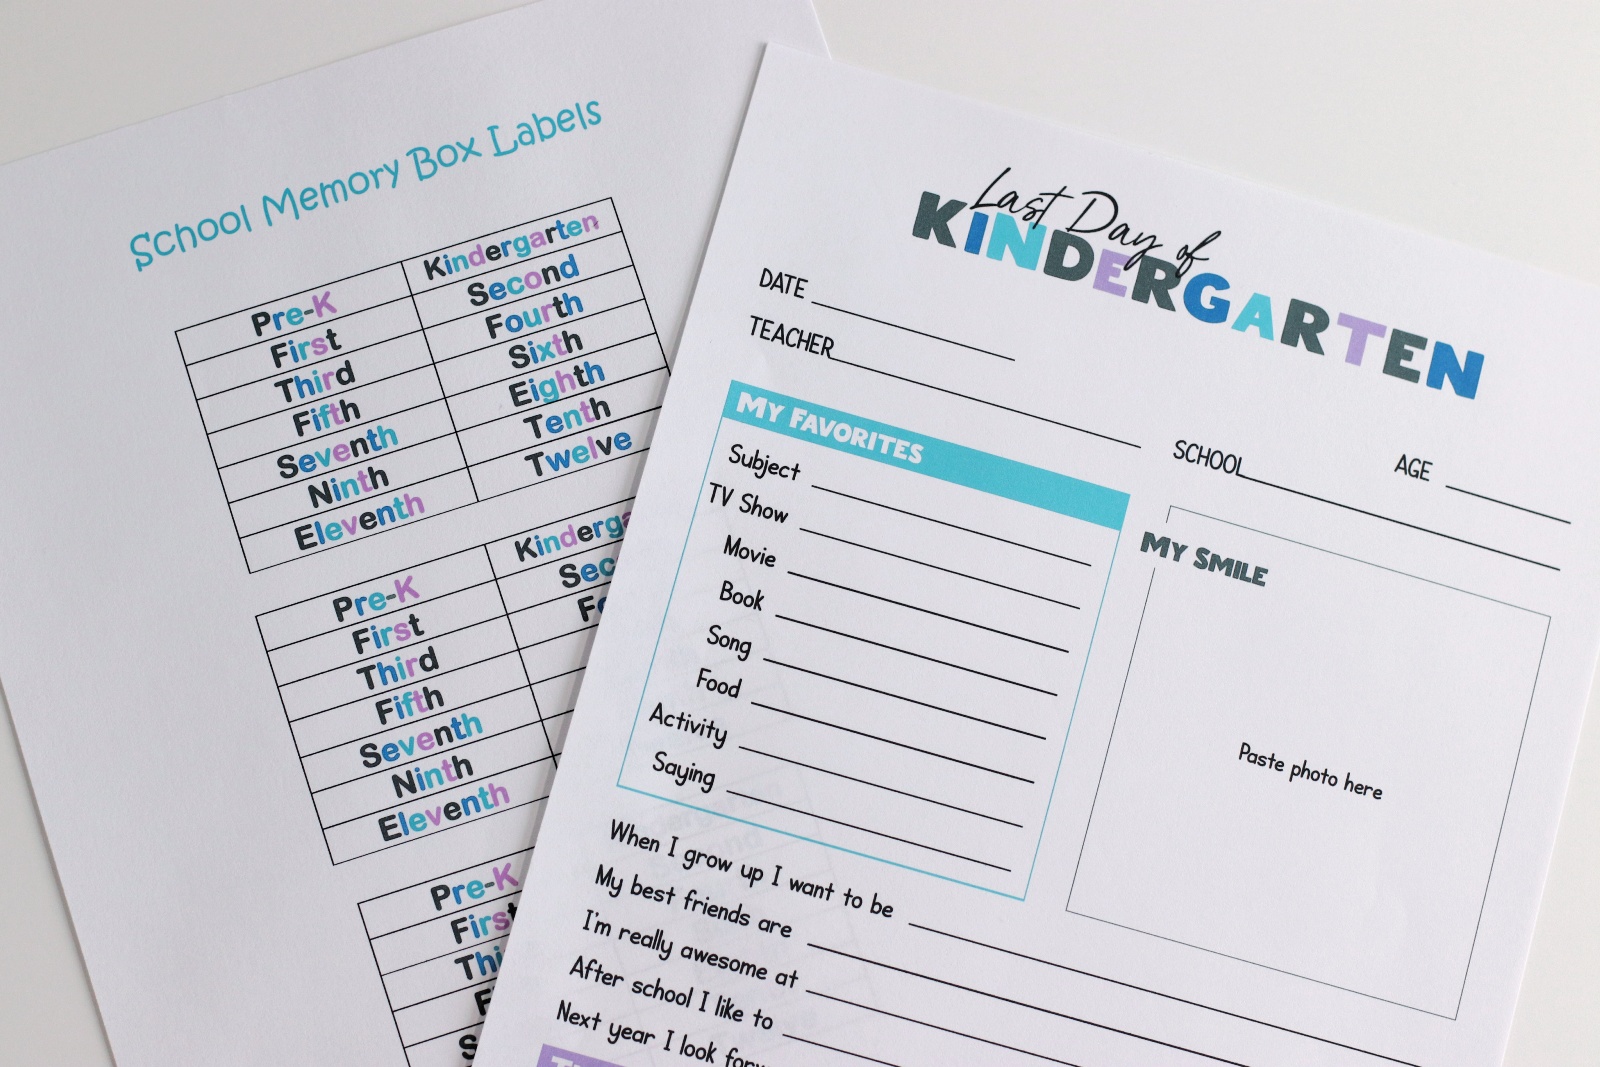 Time Capsule Kit for setting up school memory boxes - free printables!